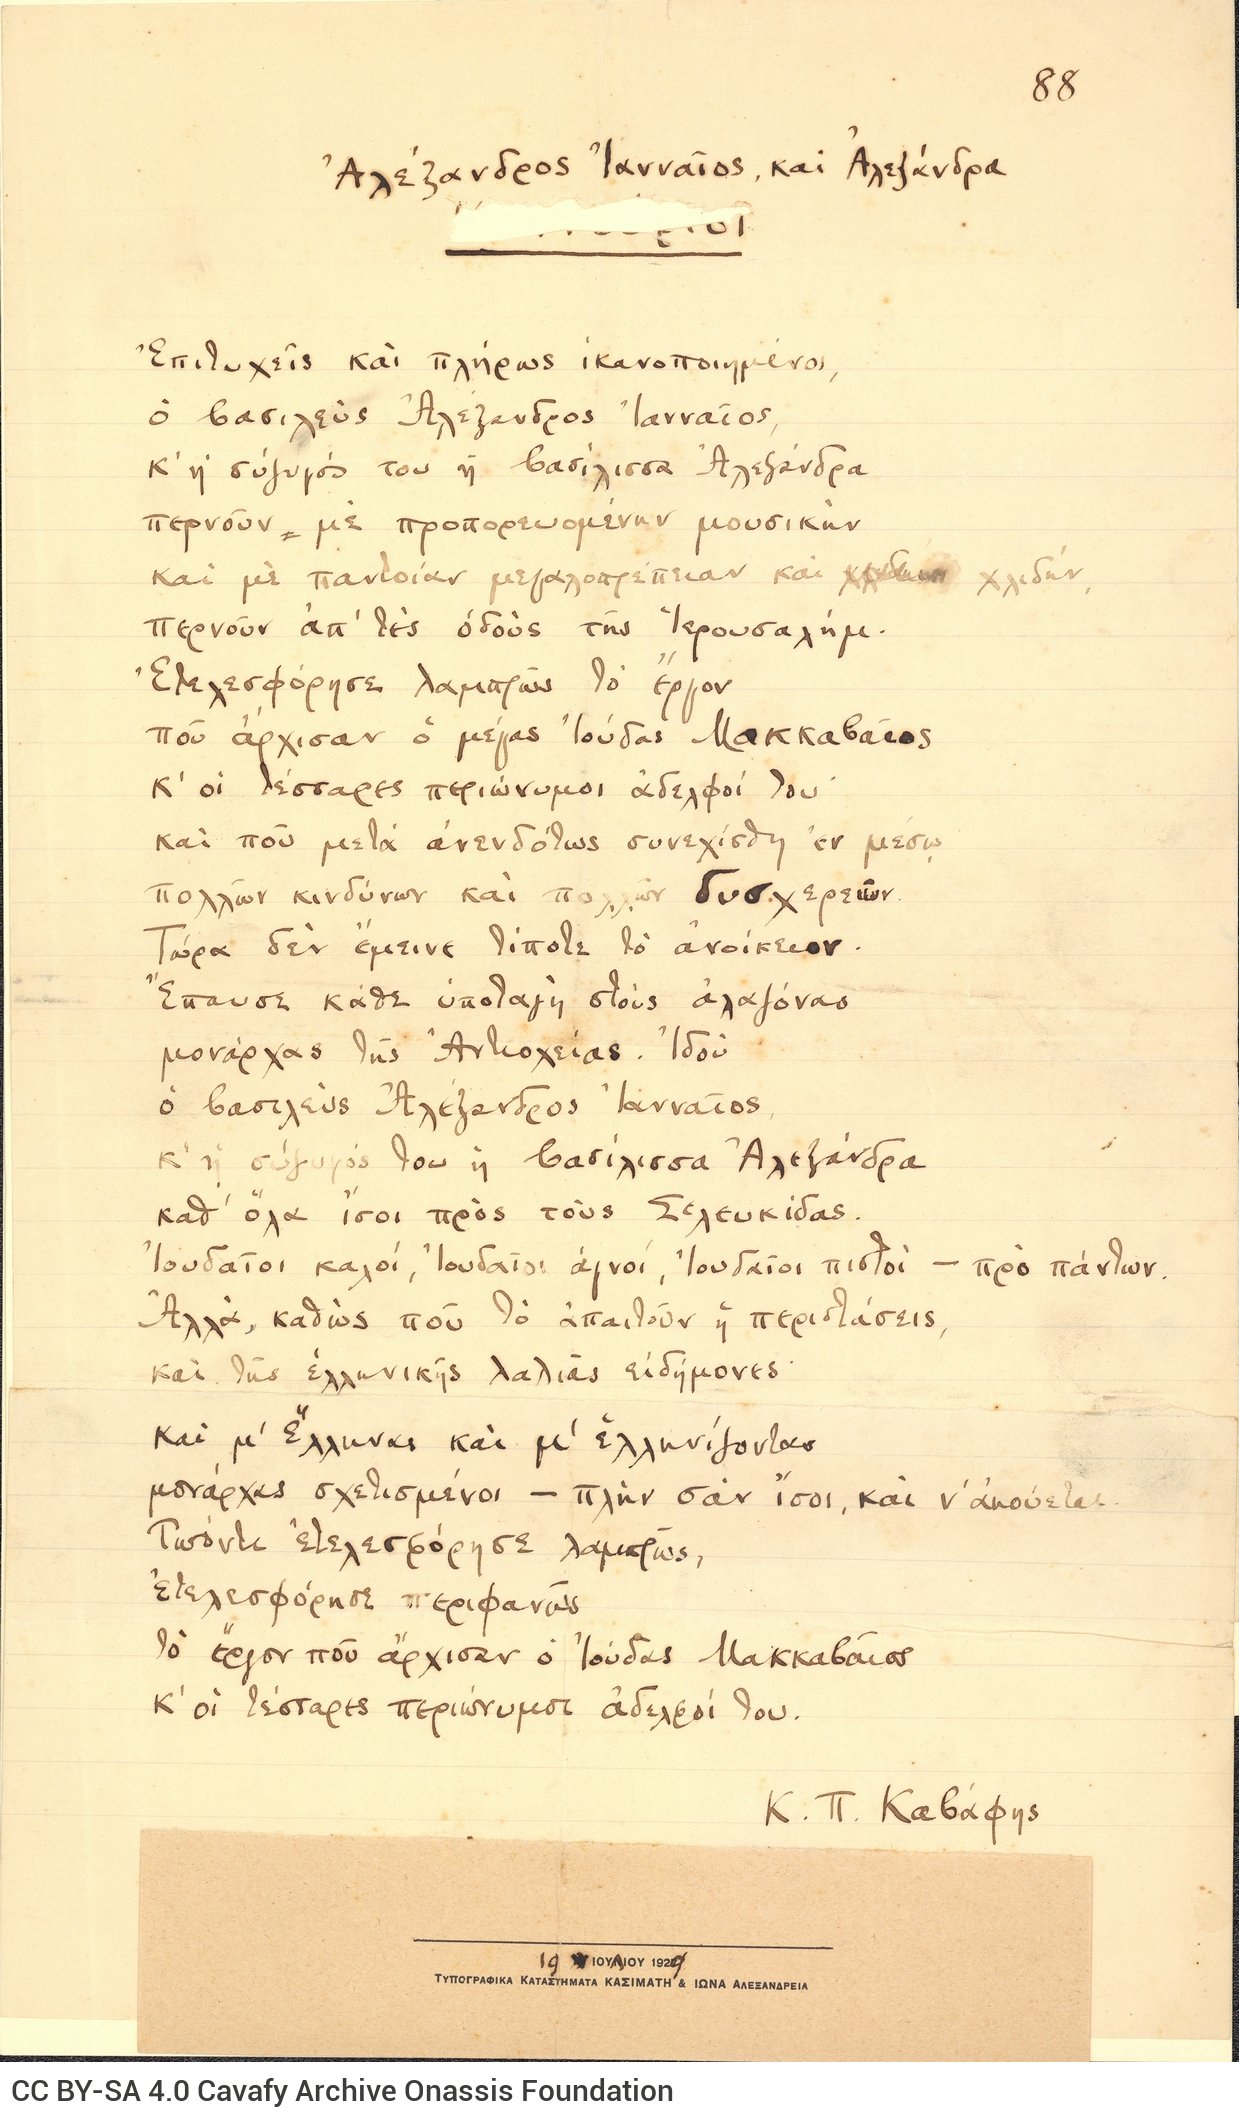 Autograph manuscript of the poem "Alexander Jannaeus, and Alexandra" on one side of a ruled sheet. At the bottom, affixed 